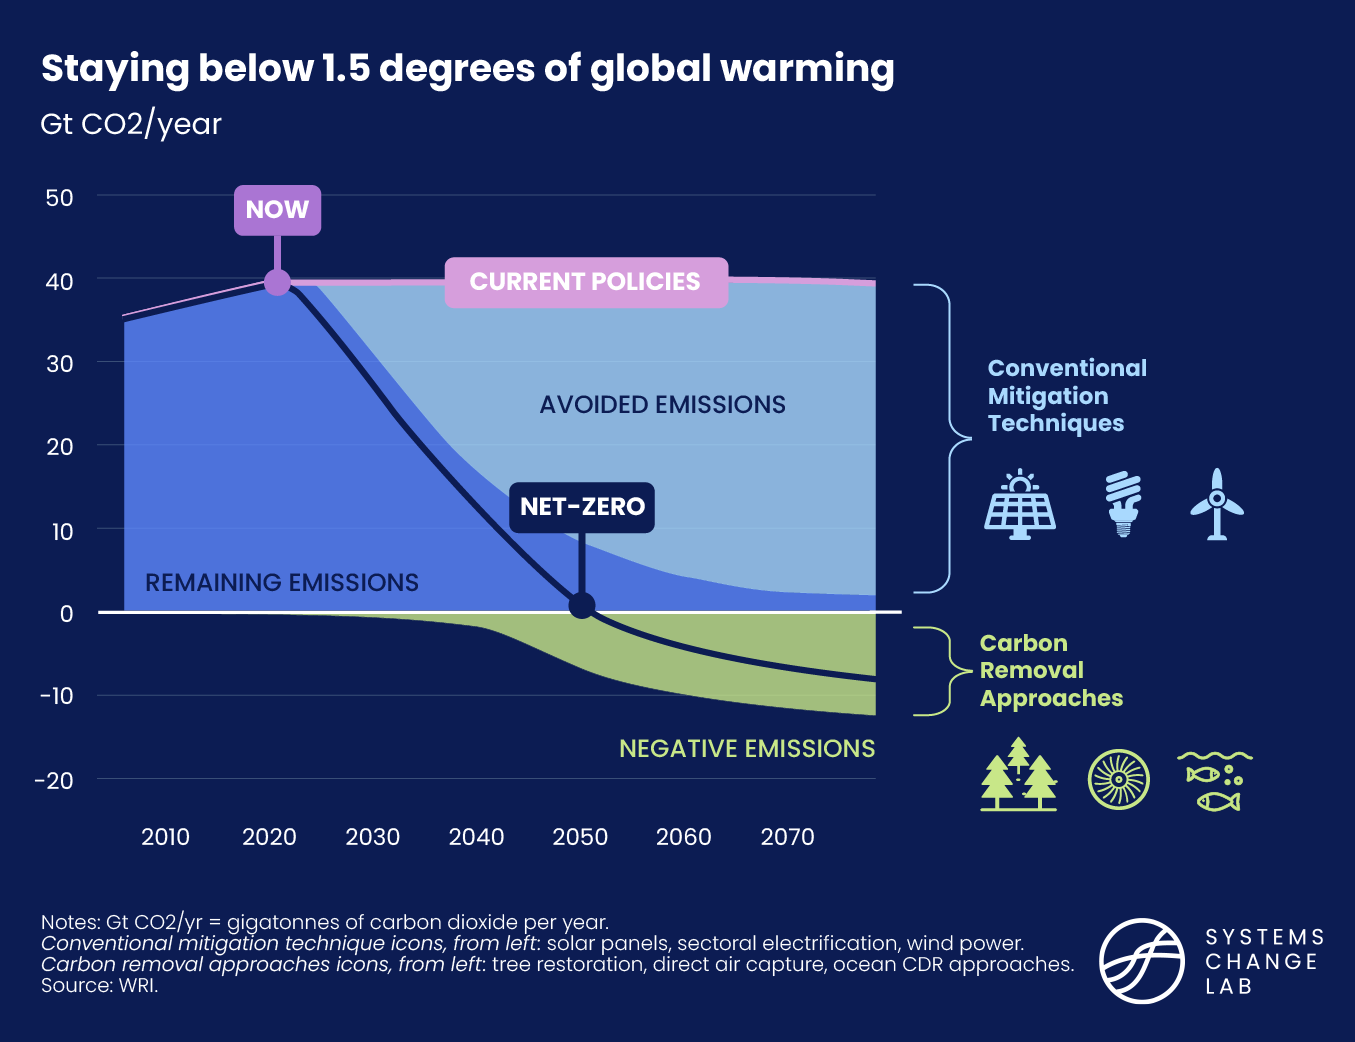 Staying below 1.5 degrees of global warming with mitigation techniques and carbon removal approaches